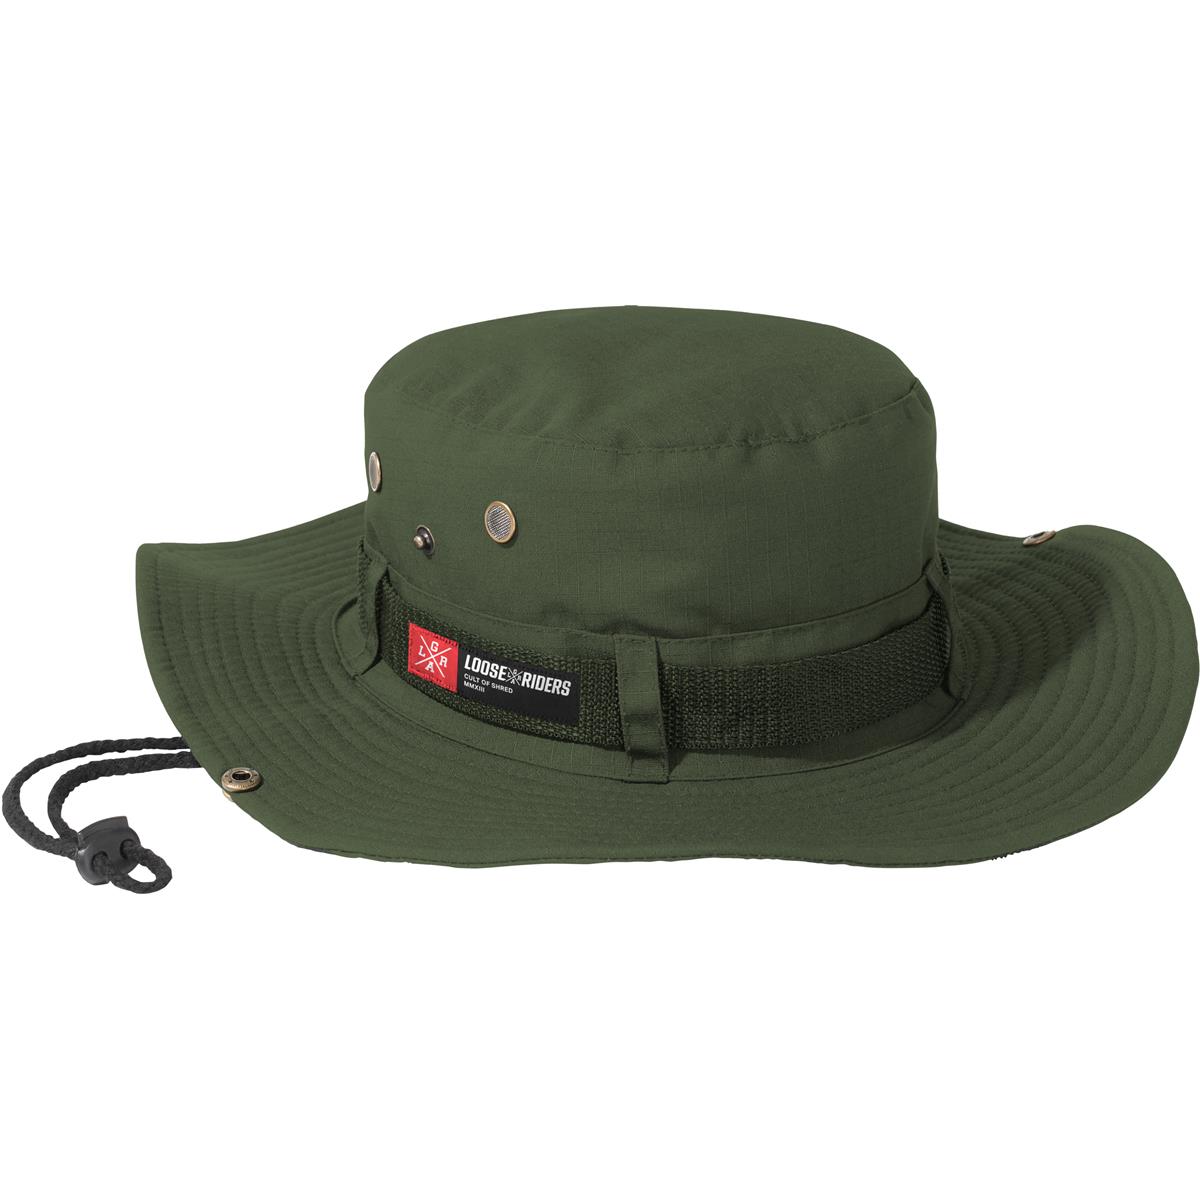 Loose Riders Hat Booney Hat Olive